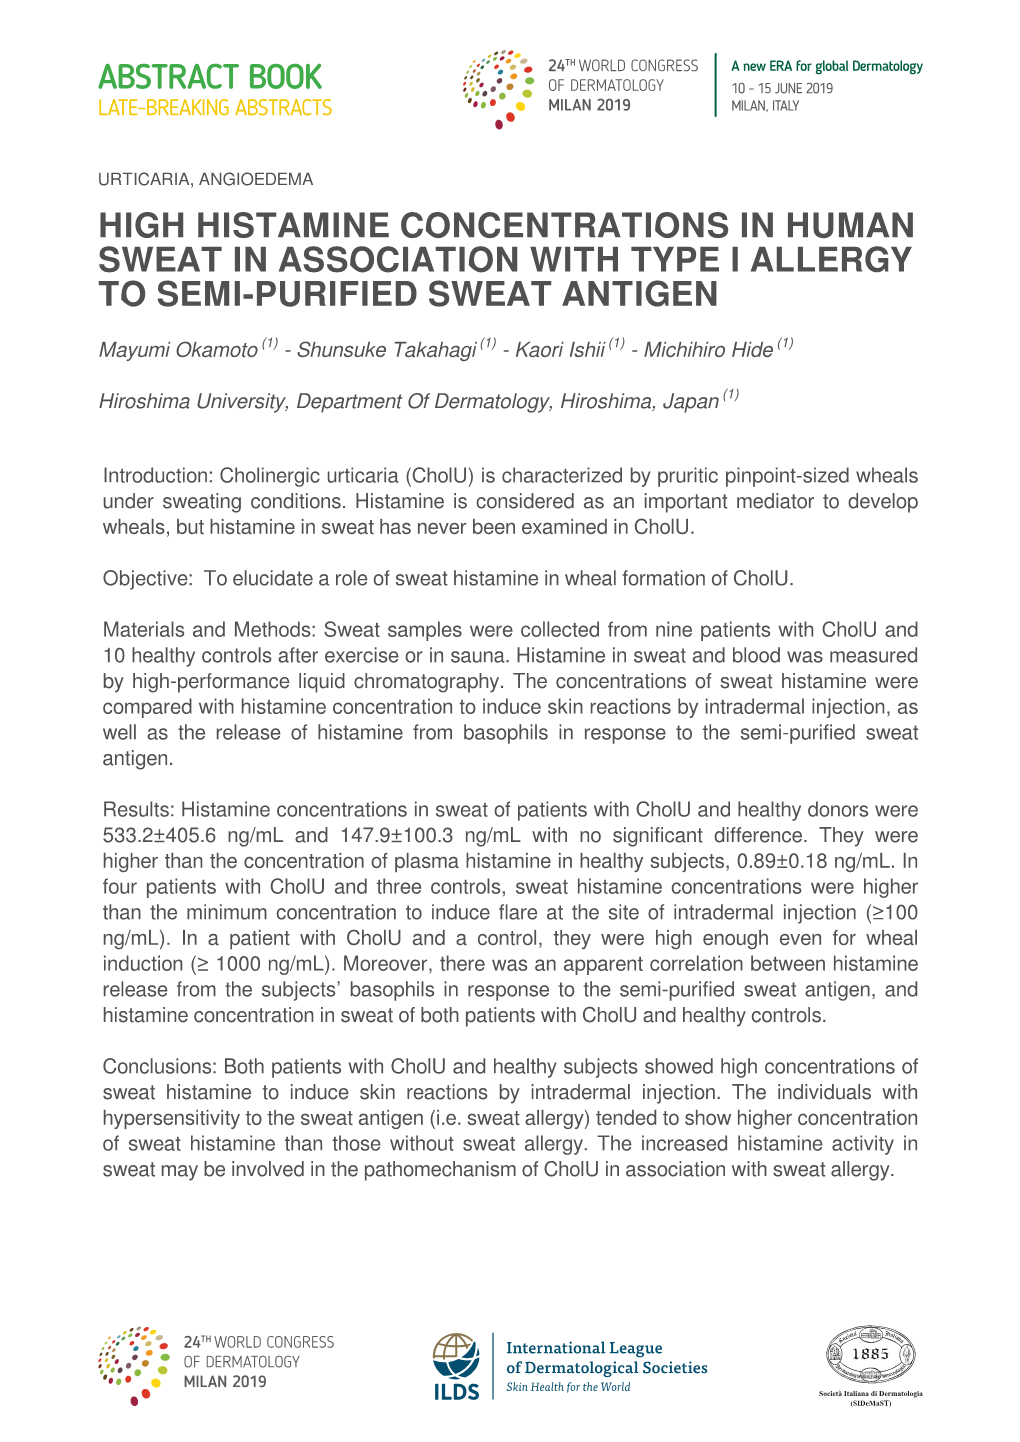 High Histamine Concentrations in Human Sweat in Association with Type I Allergy to Semi-Purified Sweat Antigen